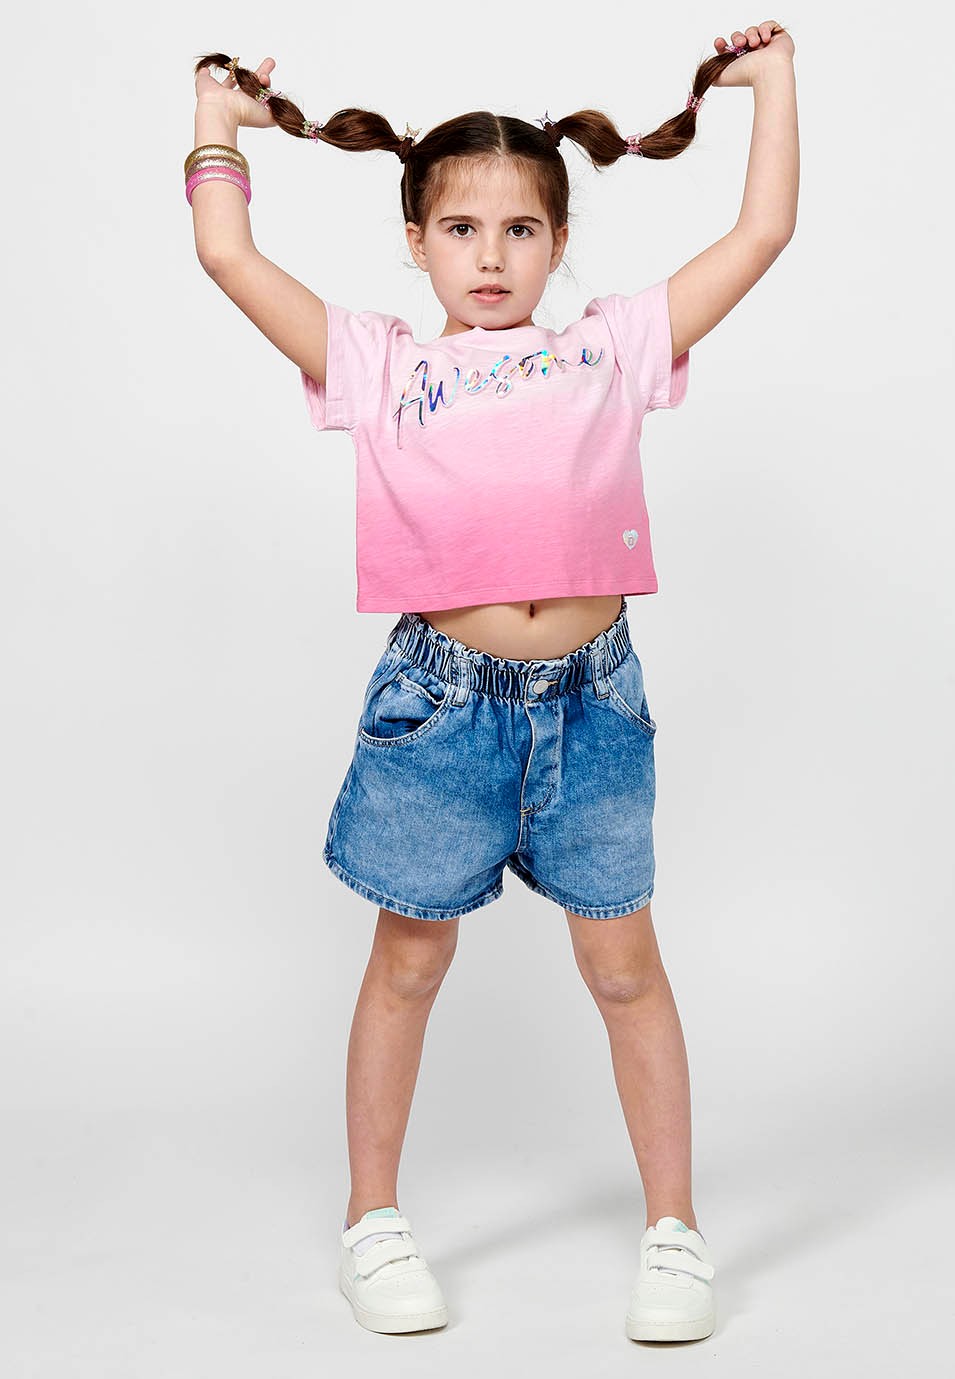 Short-sleeved T-shirt Cotton Top with Round Neck and Front Letters with Pink Volume for Girls